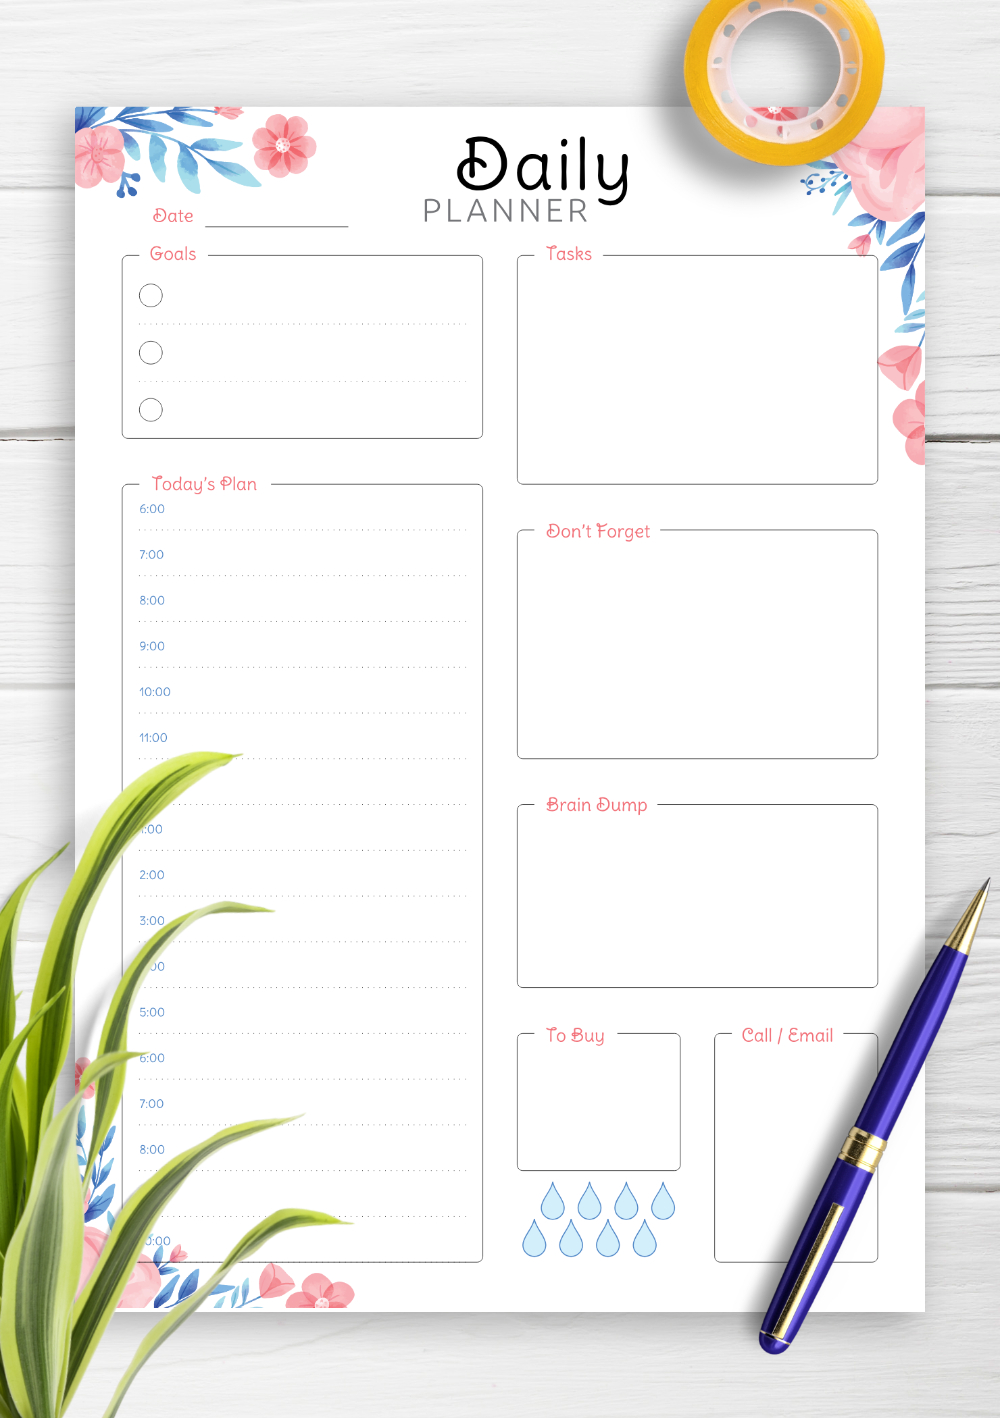 Download Printable Hourly Planner With Daily Tasks &amp; Goals within Weekly Hourly Planner Printable Pdf